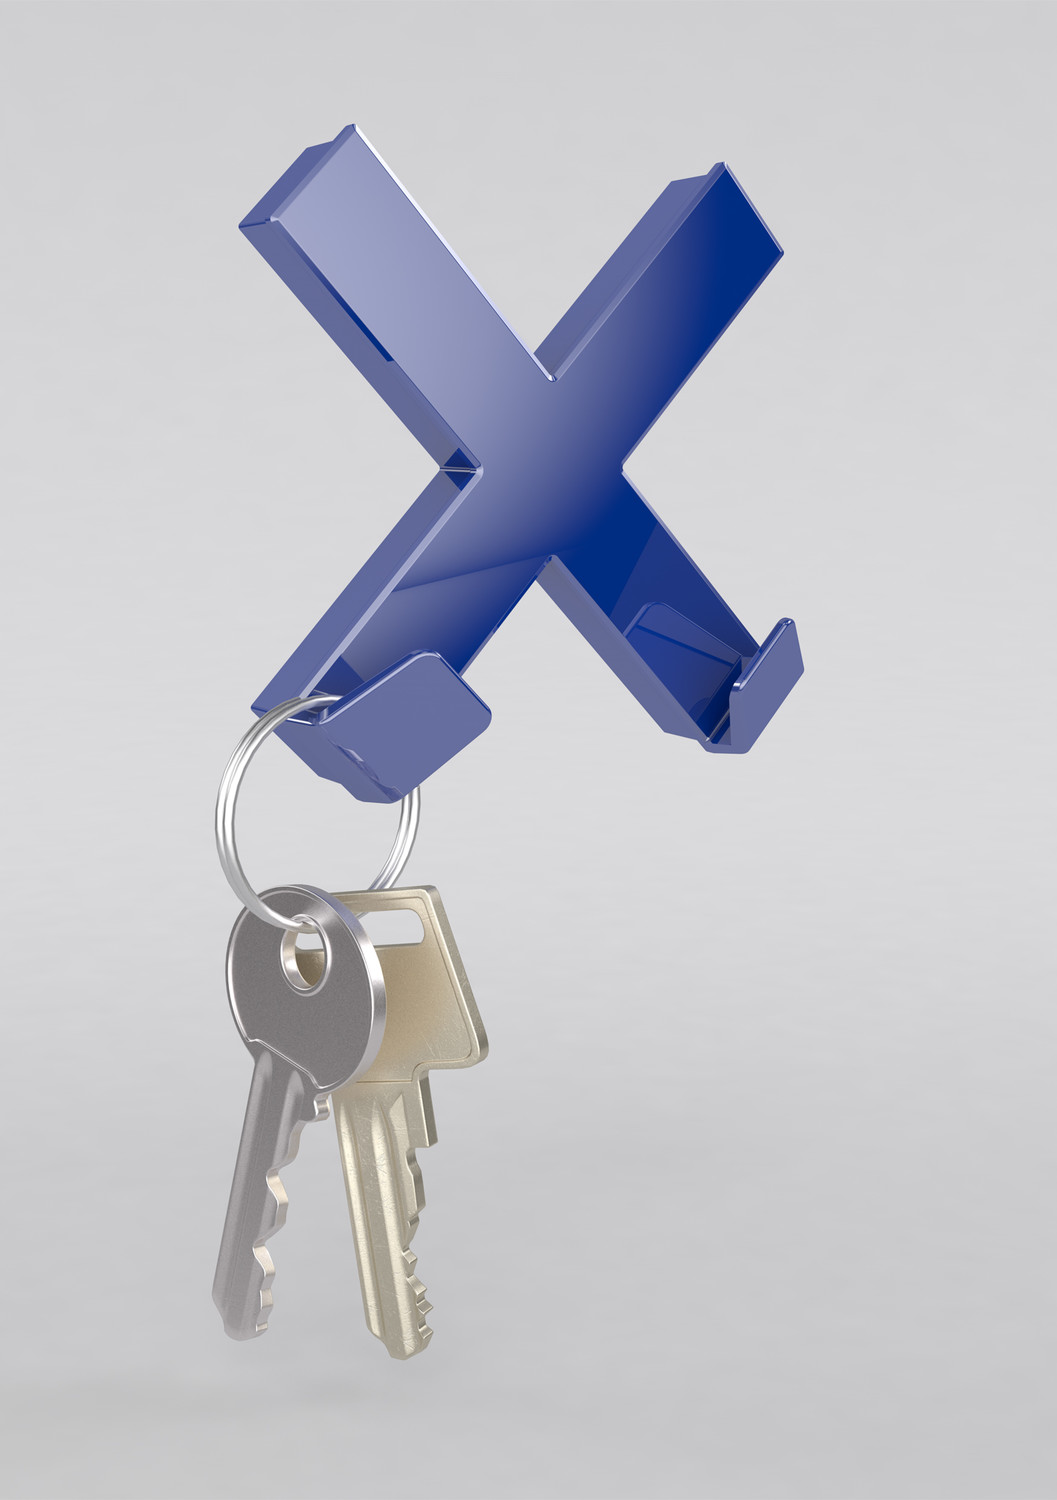 Just hang your keys on the coat rack – no problem with the handy hook on the MEGA Magnet Cross